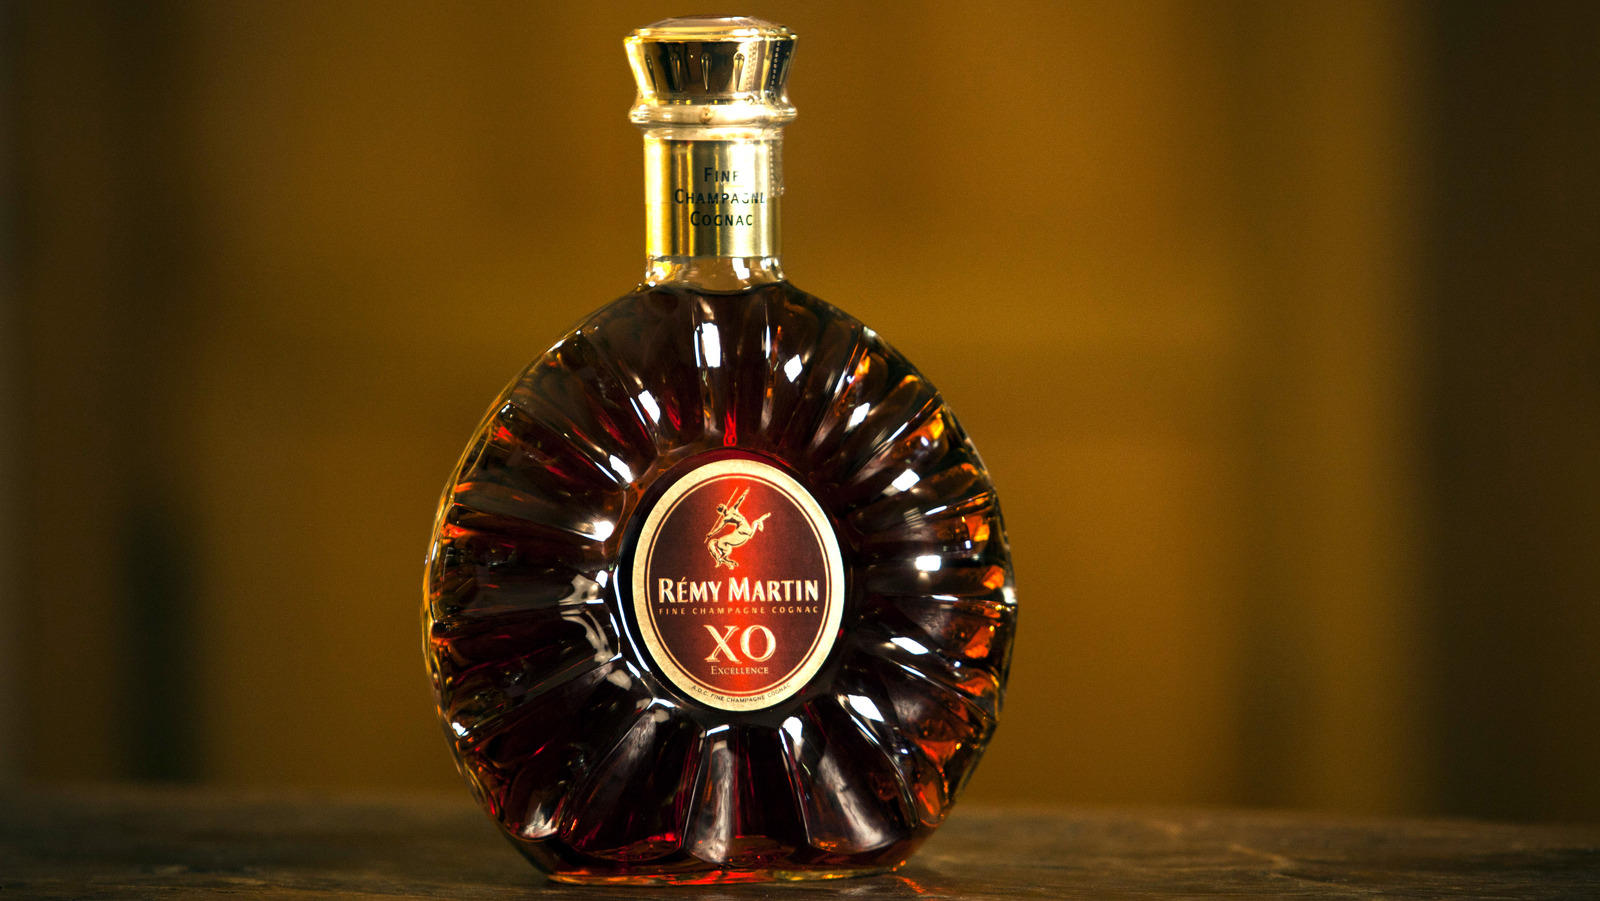 Remy Martin XO Excellence: The Ultimate Bottle Guide